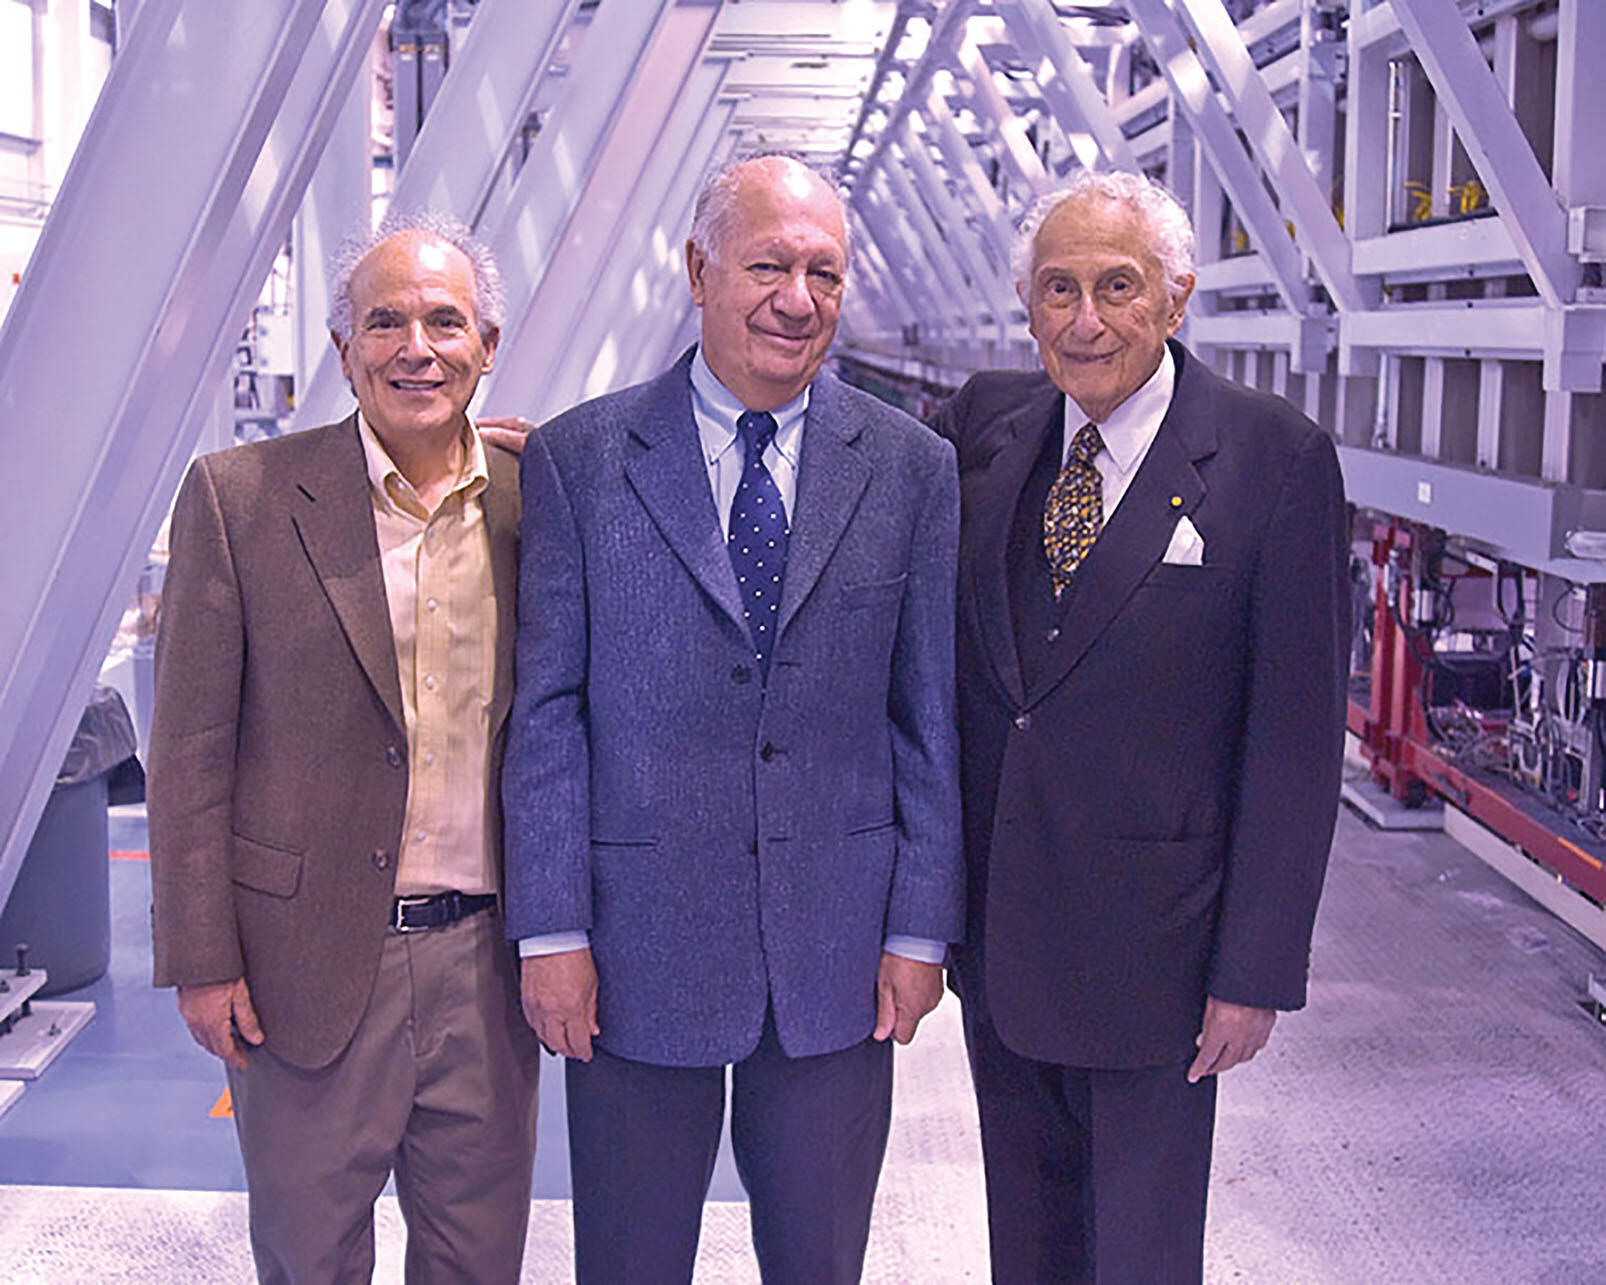 Stan Ovshinsky hosting Harley Shaiken and Ricardo Lagos at one of his continuous thin-film solar production machines in Detroit in 2009. (Photo by Brendan Ross.)